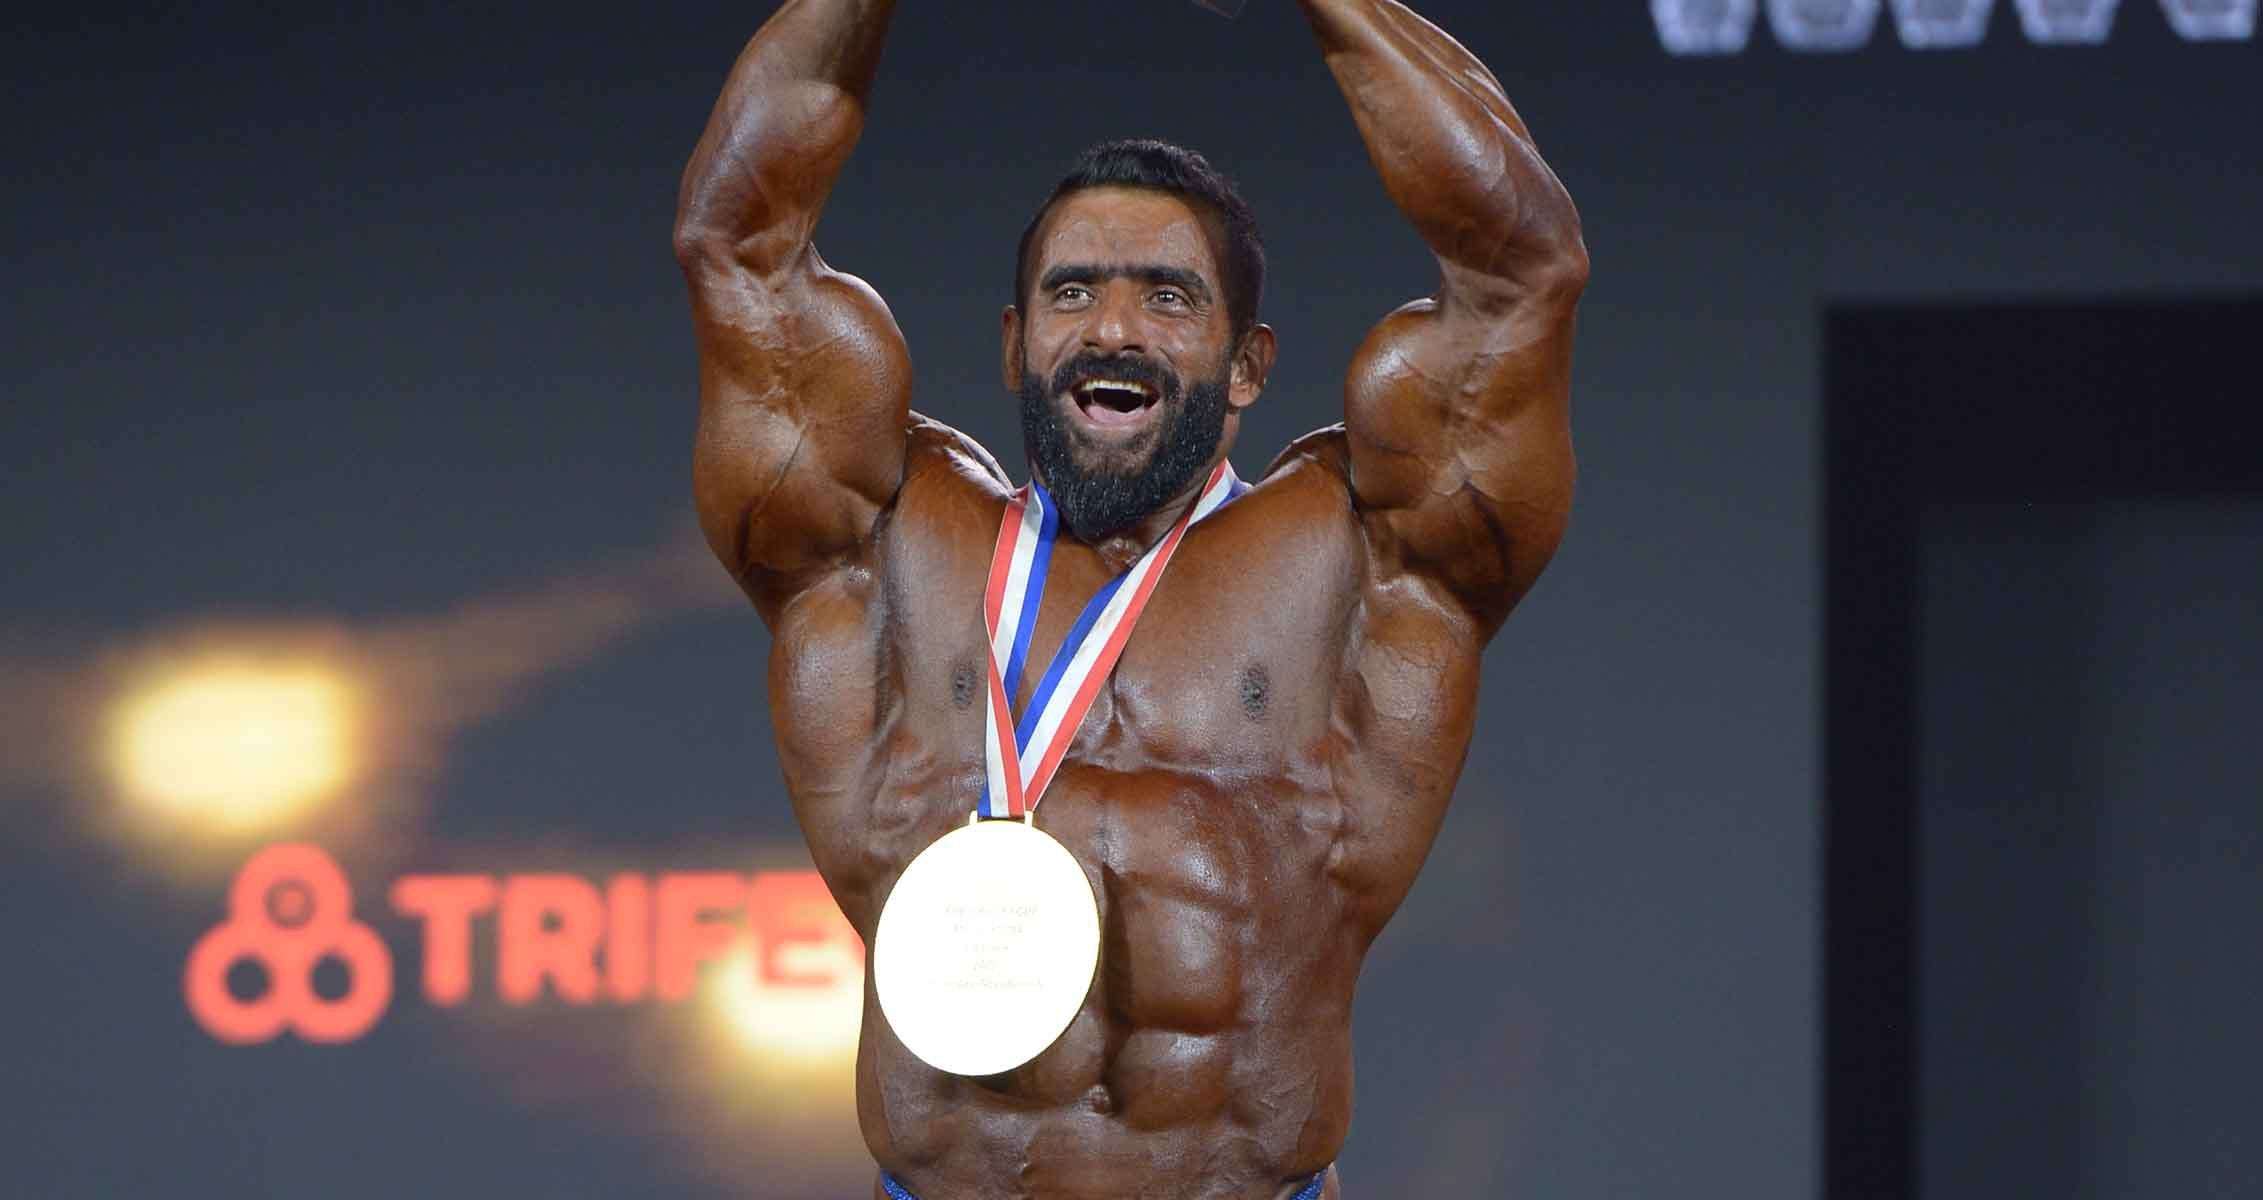 image for Hadi Choopan Is The New 2022 Mr. Olympia Champion